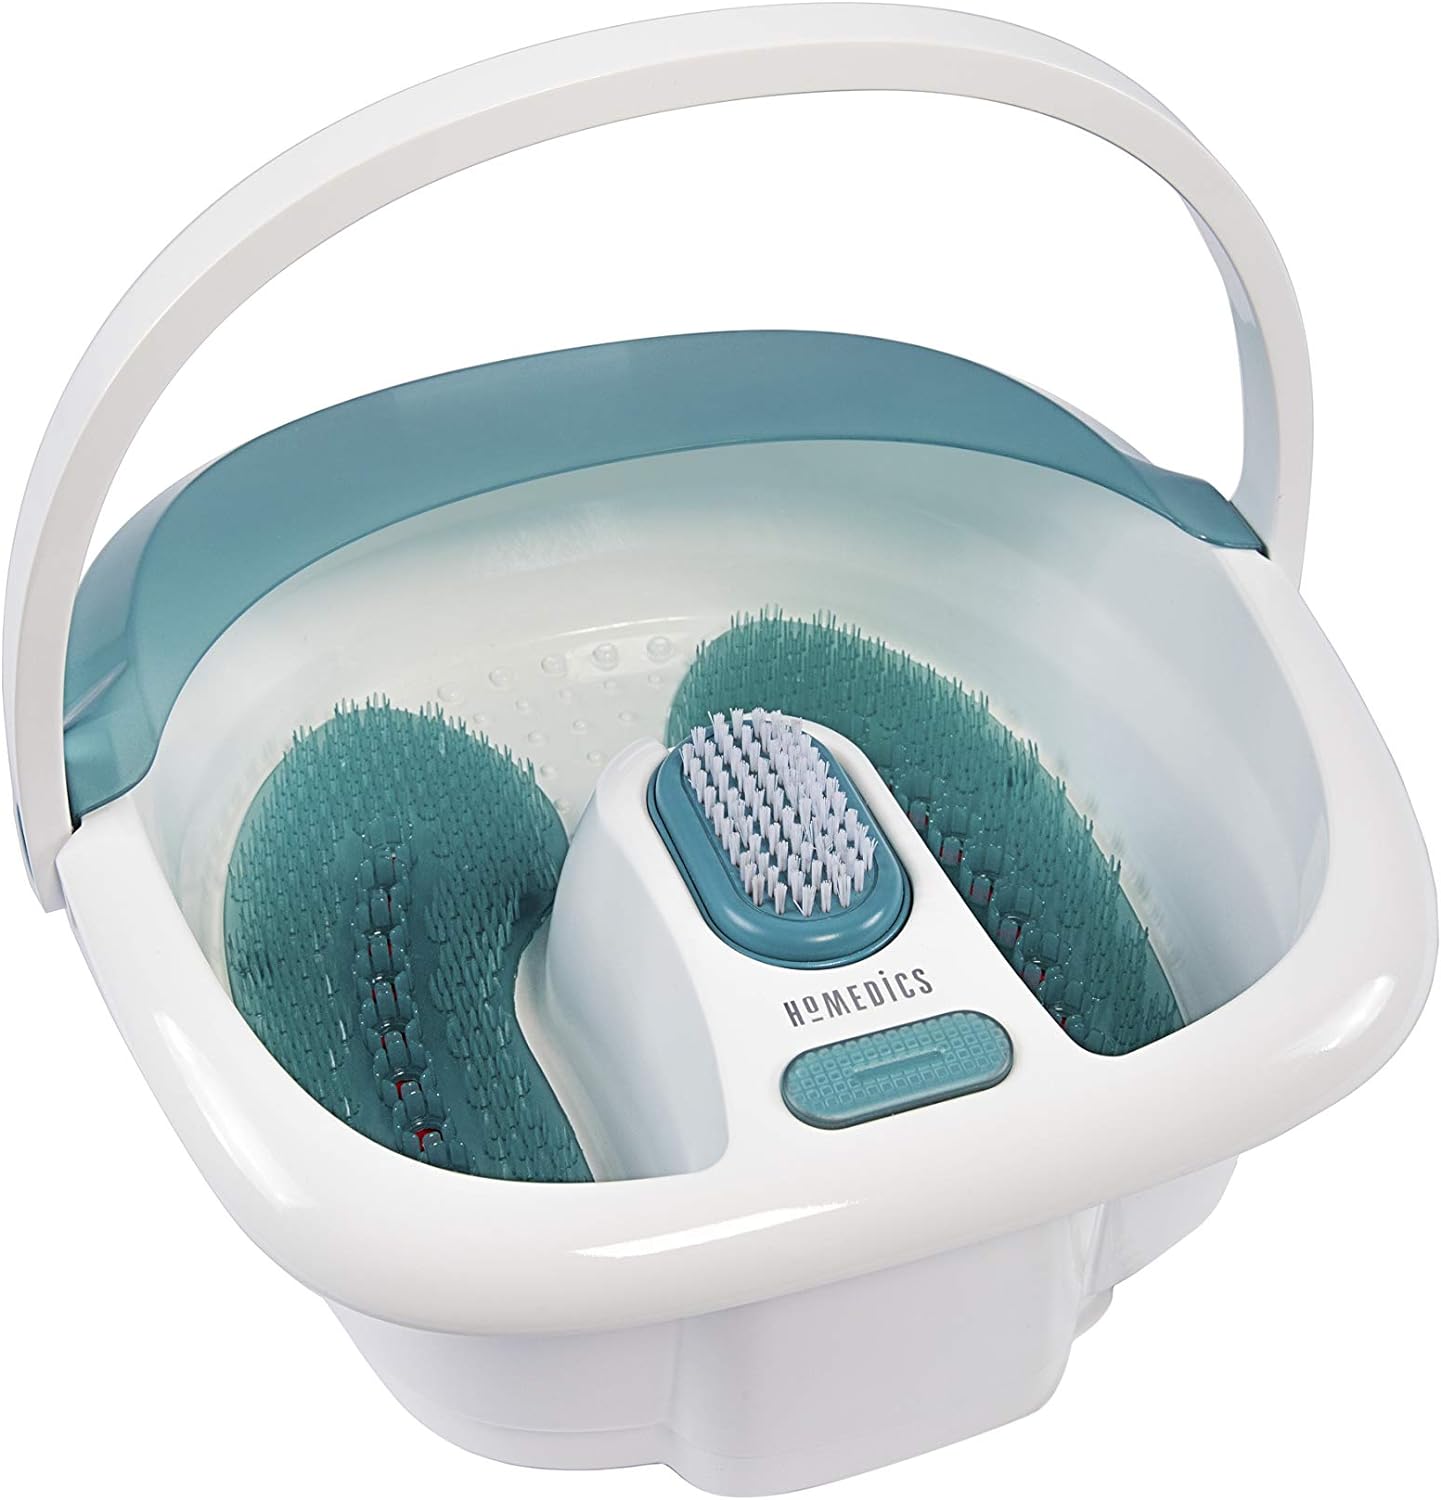 Homedics Bubble Elite Foot Spa Massager with Heat Boost, 2-in-1 Removable Pedicure Center, Toe-Touch Control, Easy Tote Handle with Splash Guard